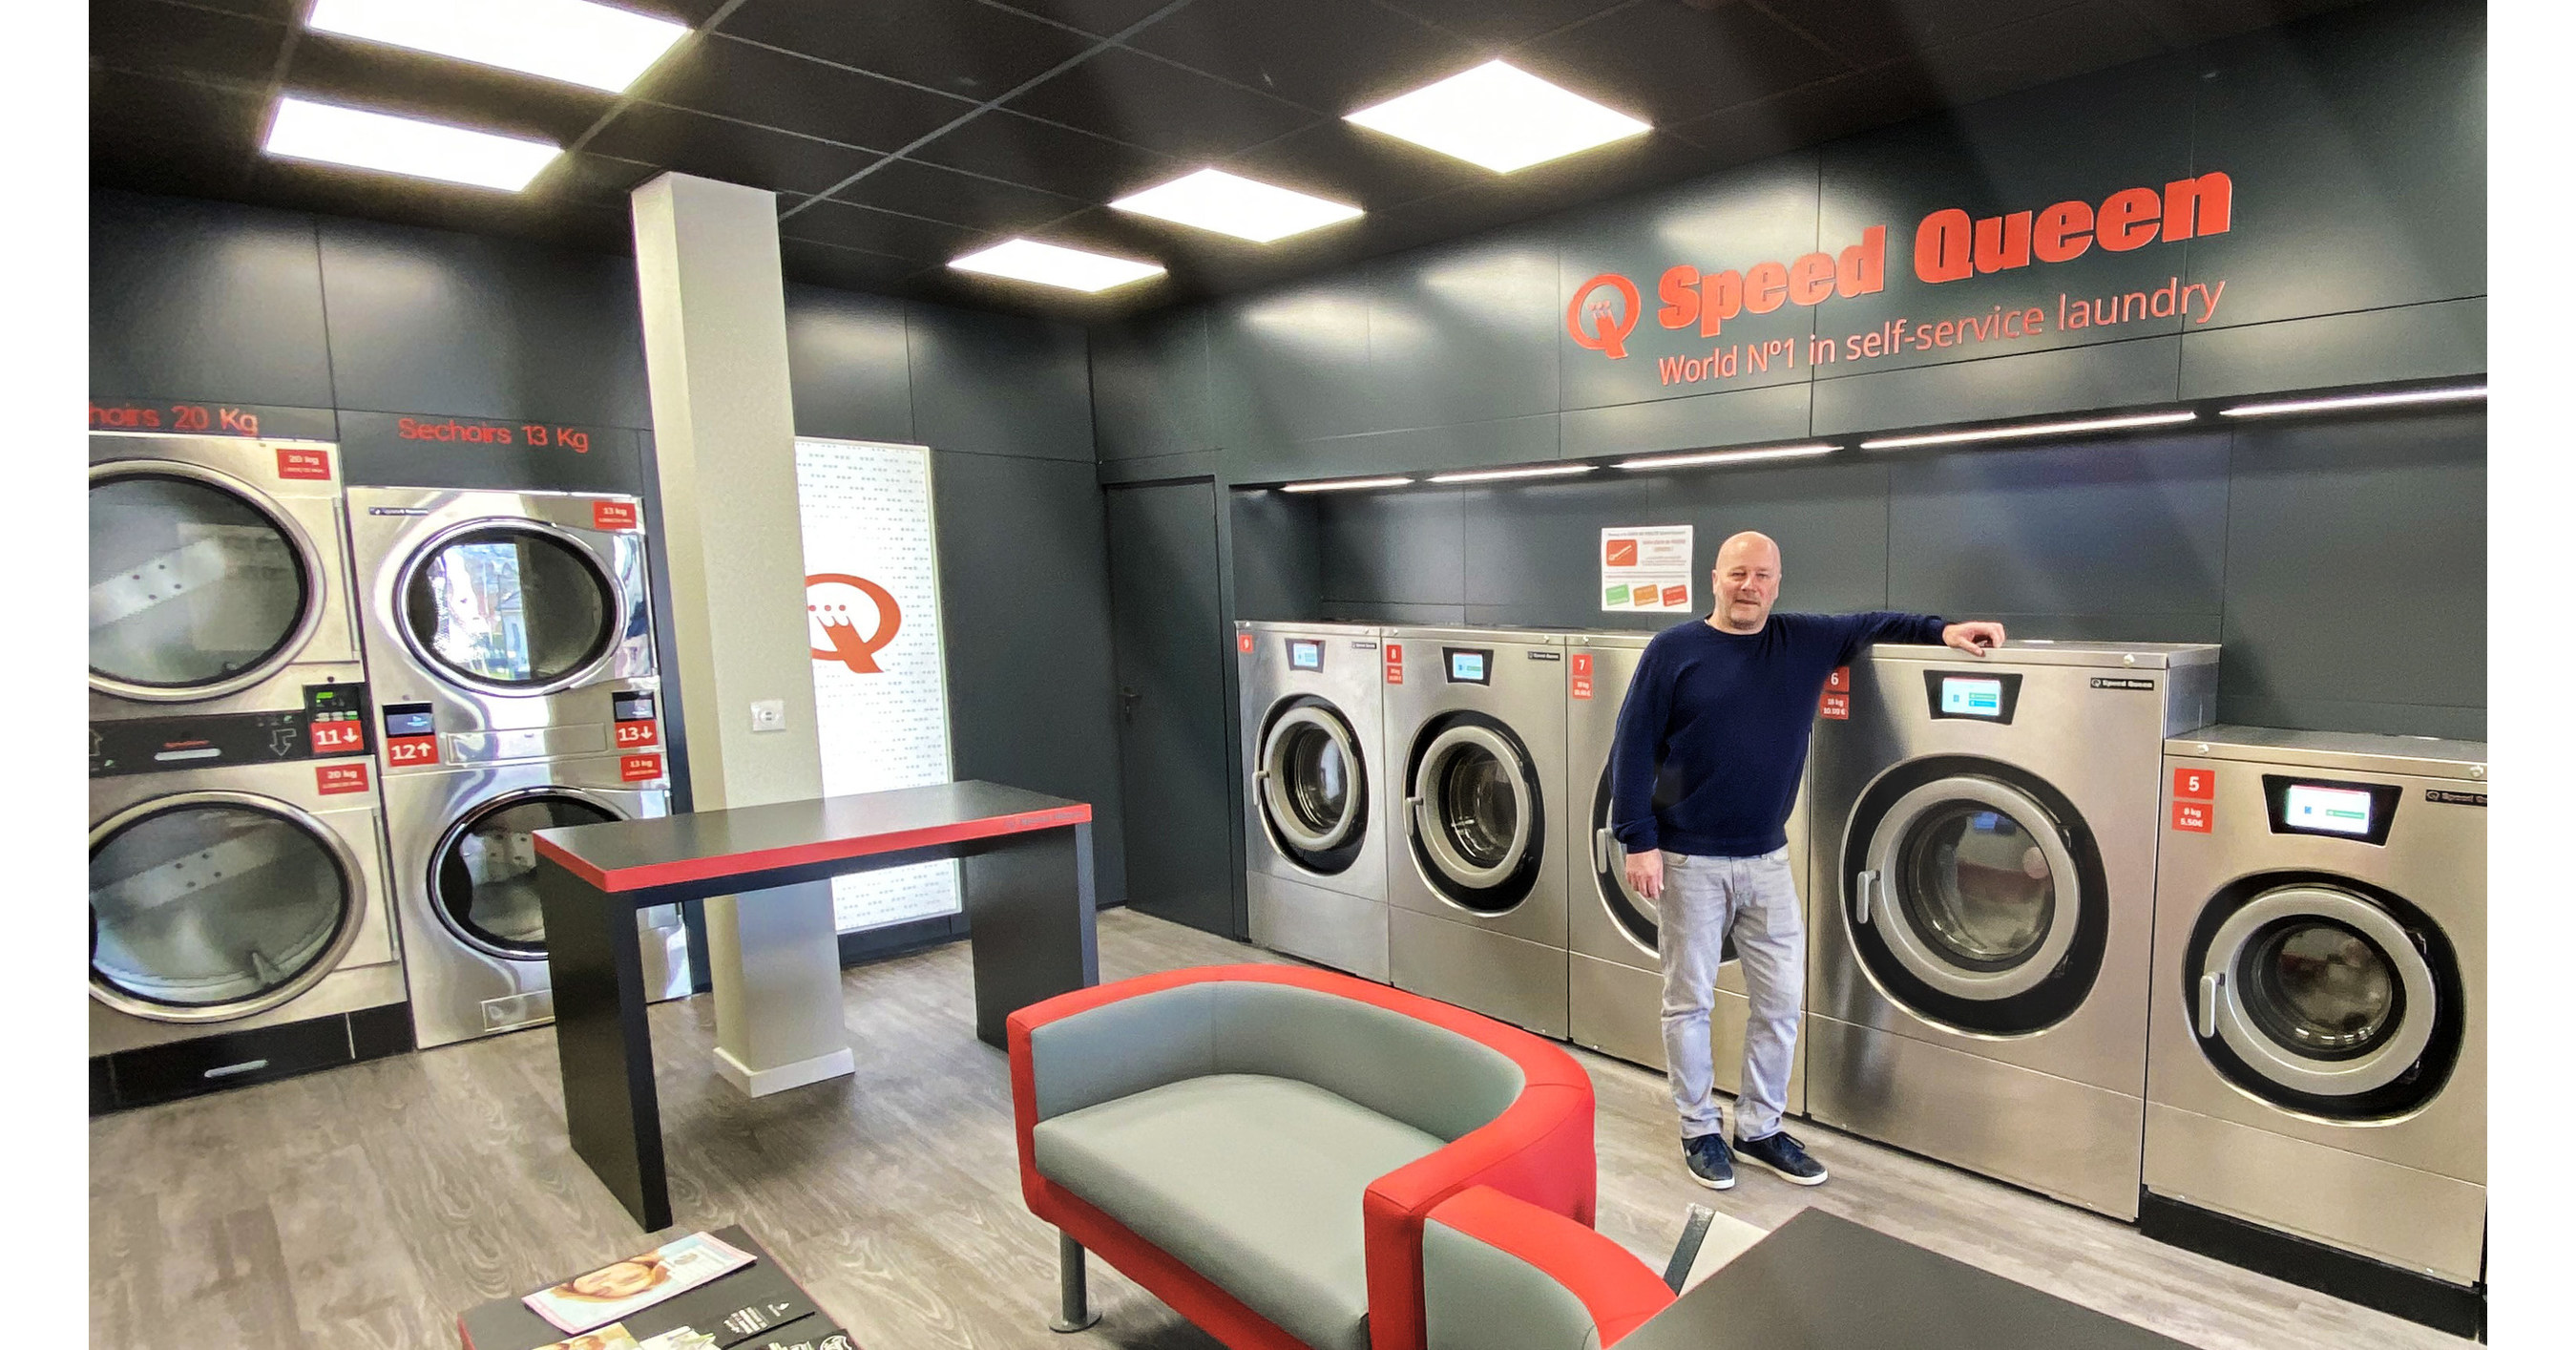 Home - Speed Queen Laundry Franchise